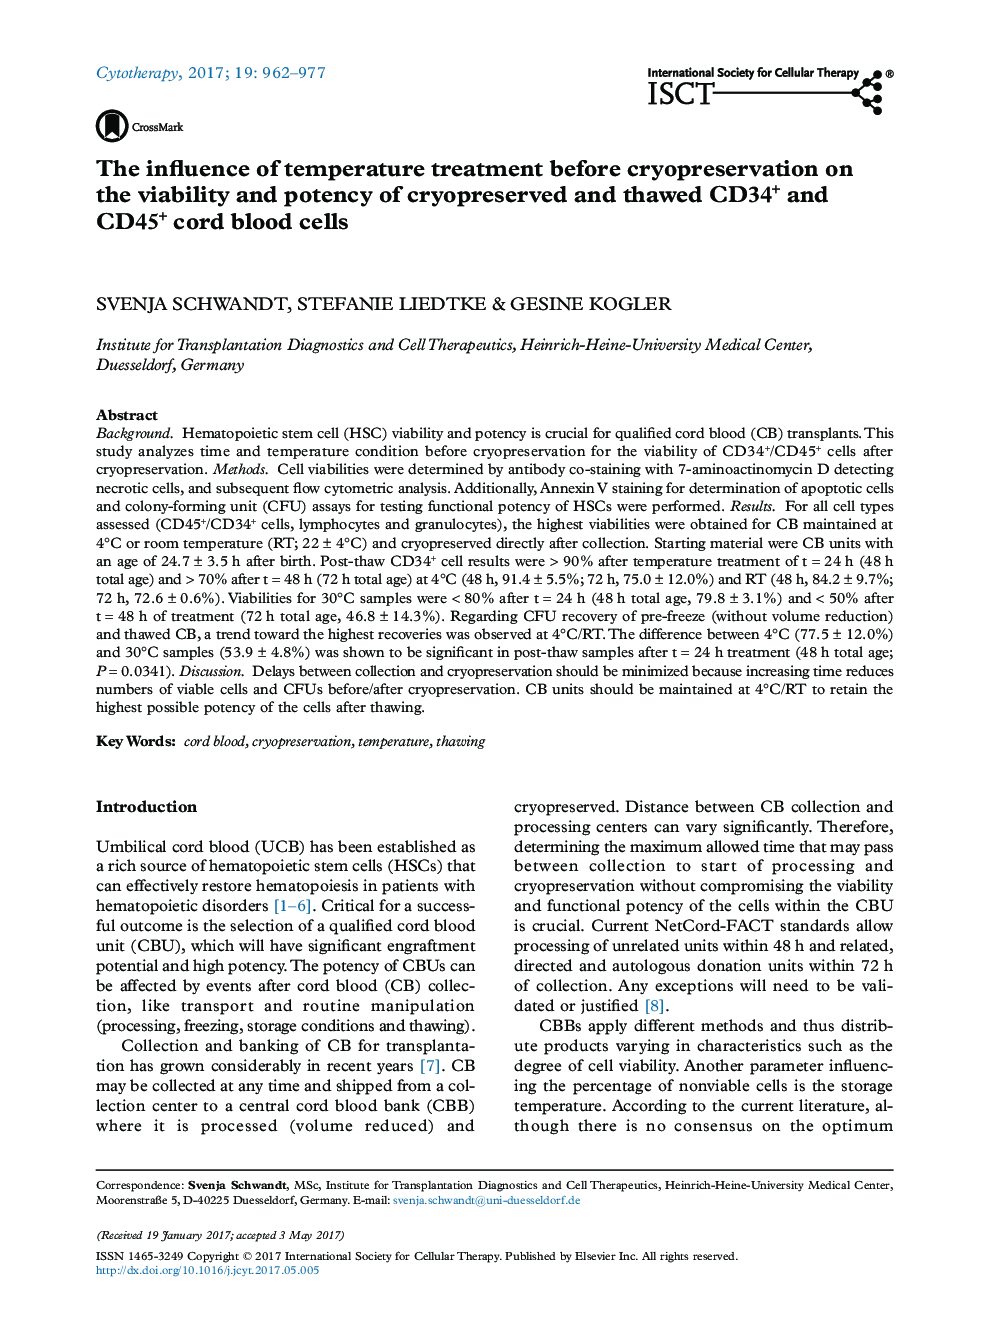 The influence of temperature treatment before cryopreservation on the viability and potency of cryopreserved and thawed CD34+ and CD45+ cord blood cells